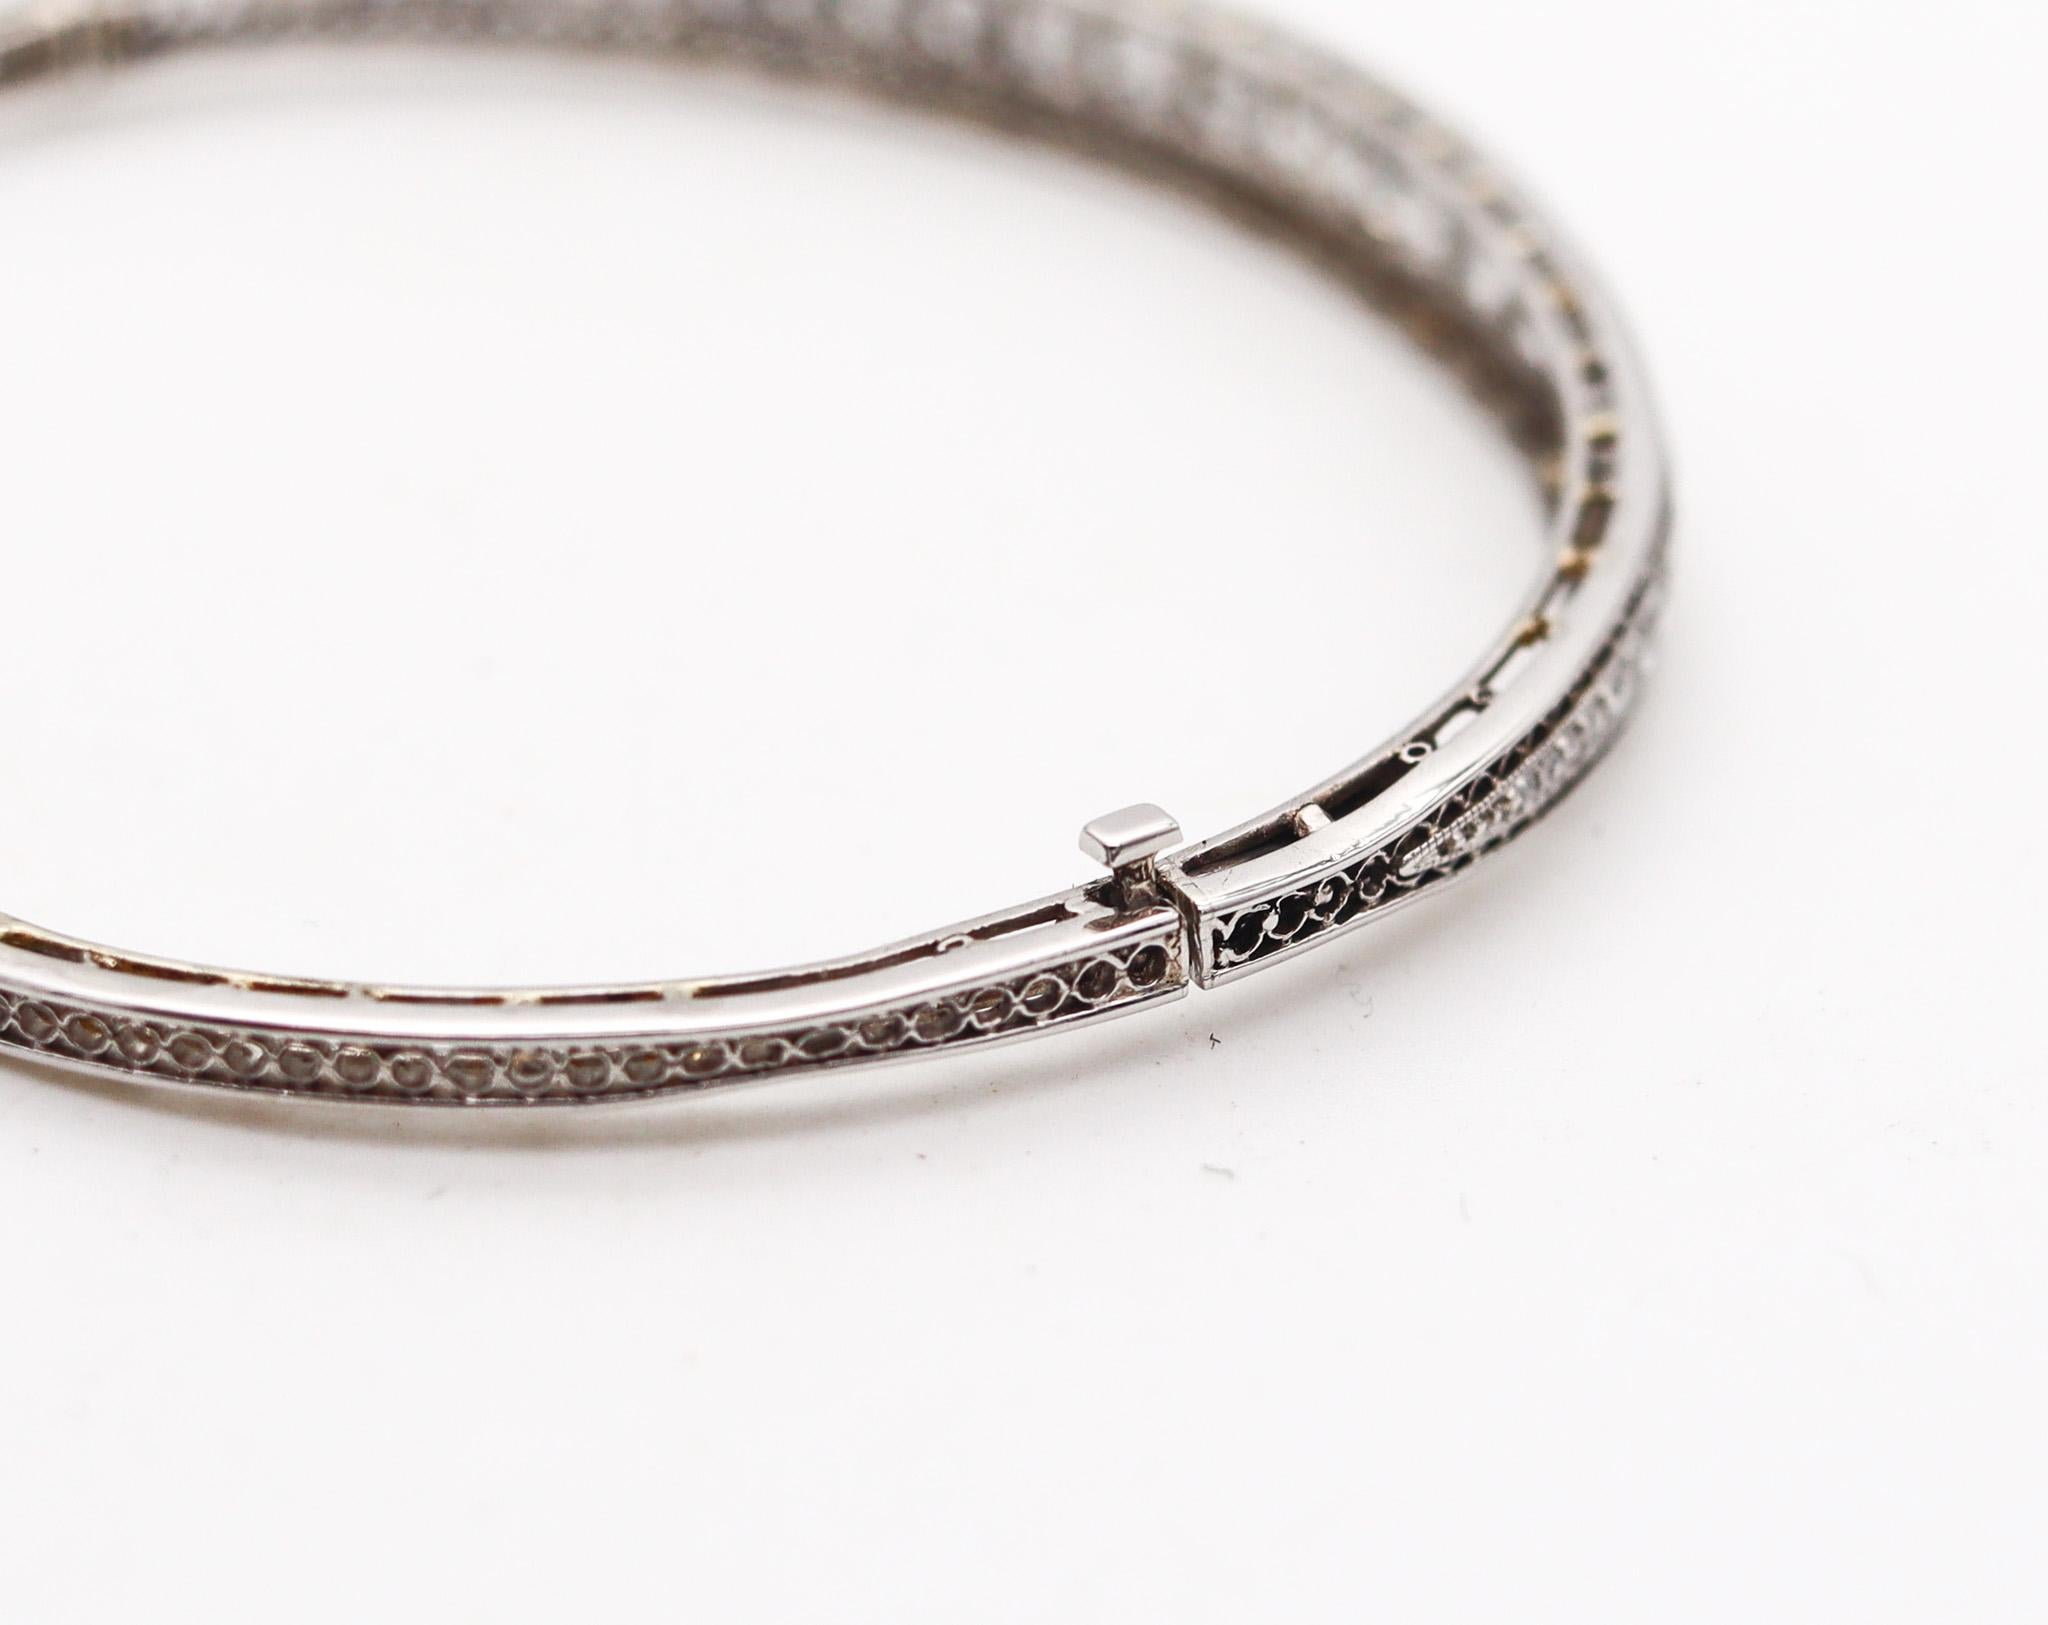 Marcus & Co. 1910 Edwardian Bangle Bracelet In Platinum With 3.16 Ctw In Diamond For Sale 2